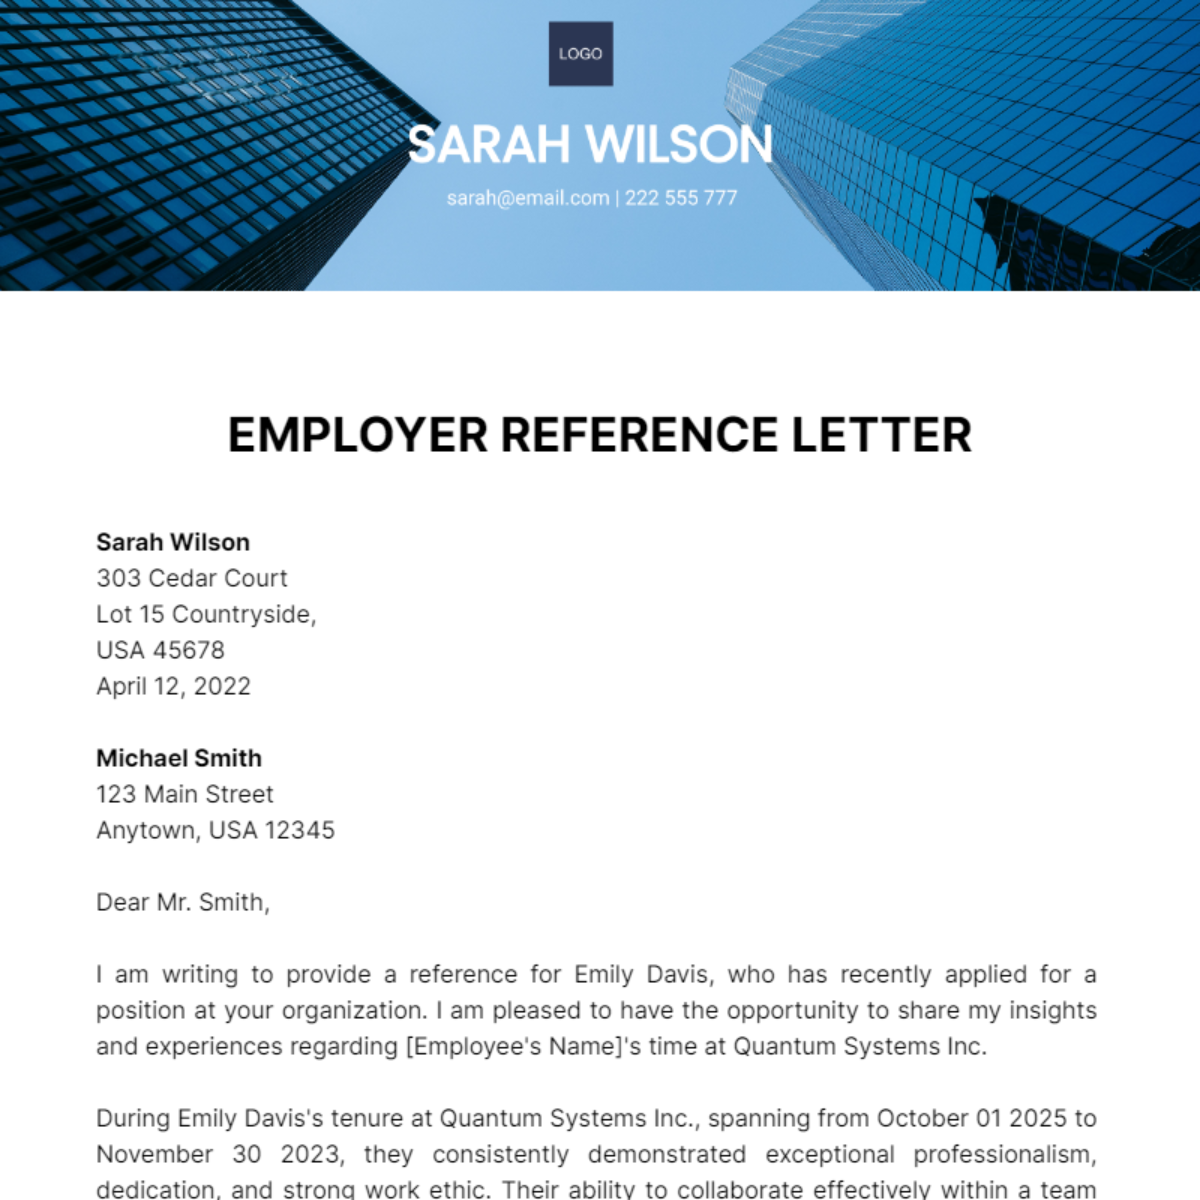 Free employer reference Letter Template